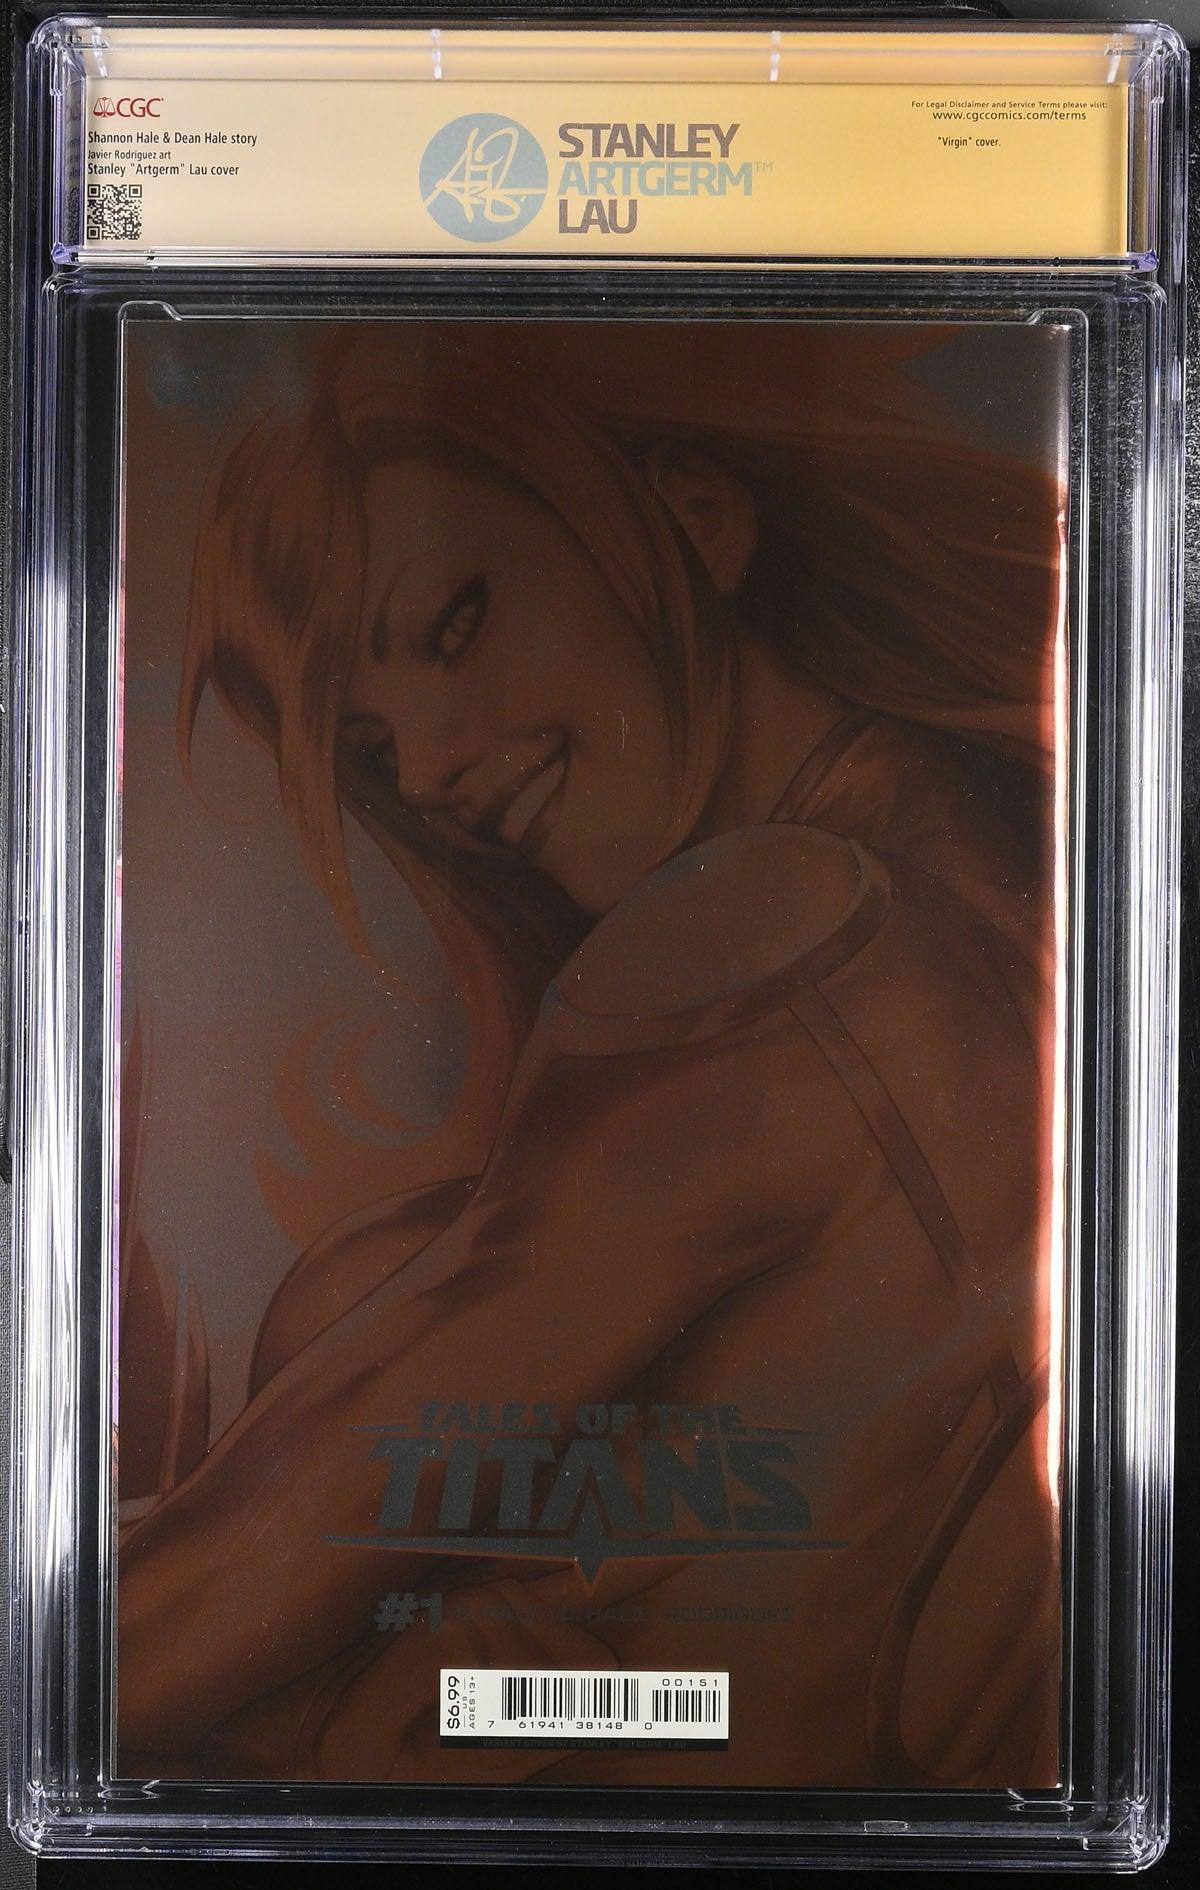 CGC TALES OF THE TITANS #1 LAU FOIL EDITION (9.8) SIGNATURE SERIES - SIGNED BY STANLEY "ARTGERM" - Kings Comics